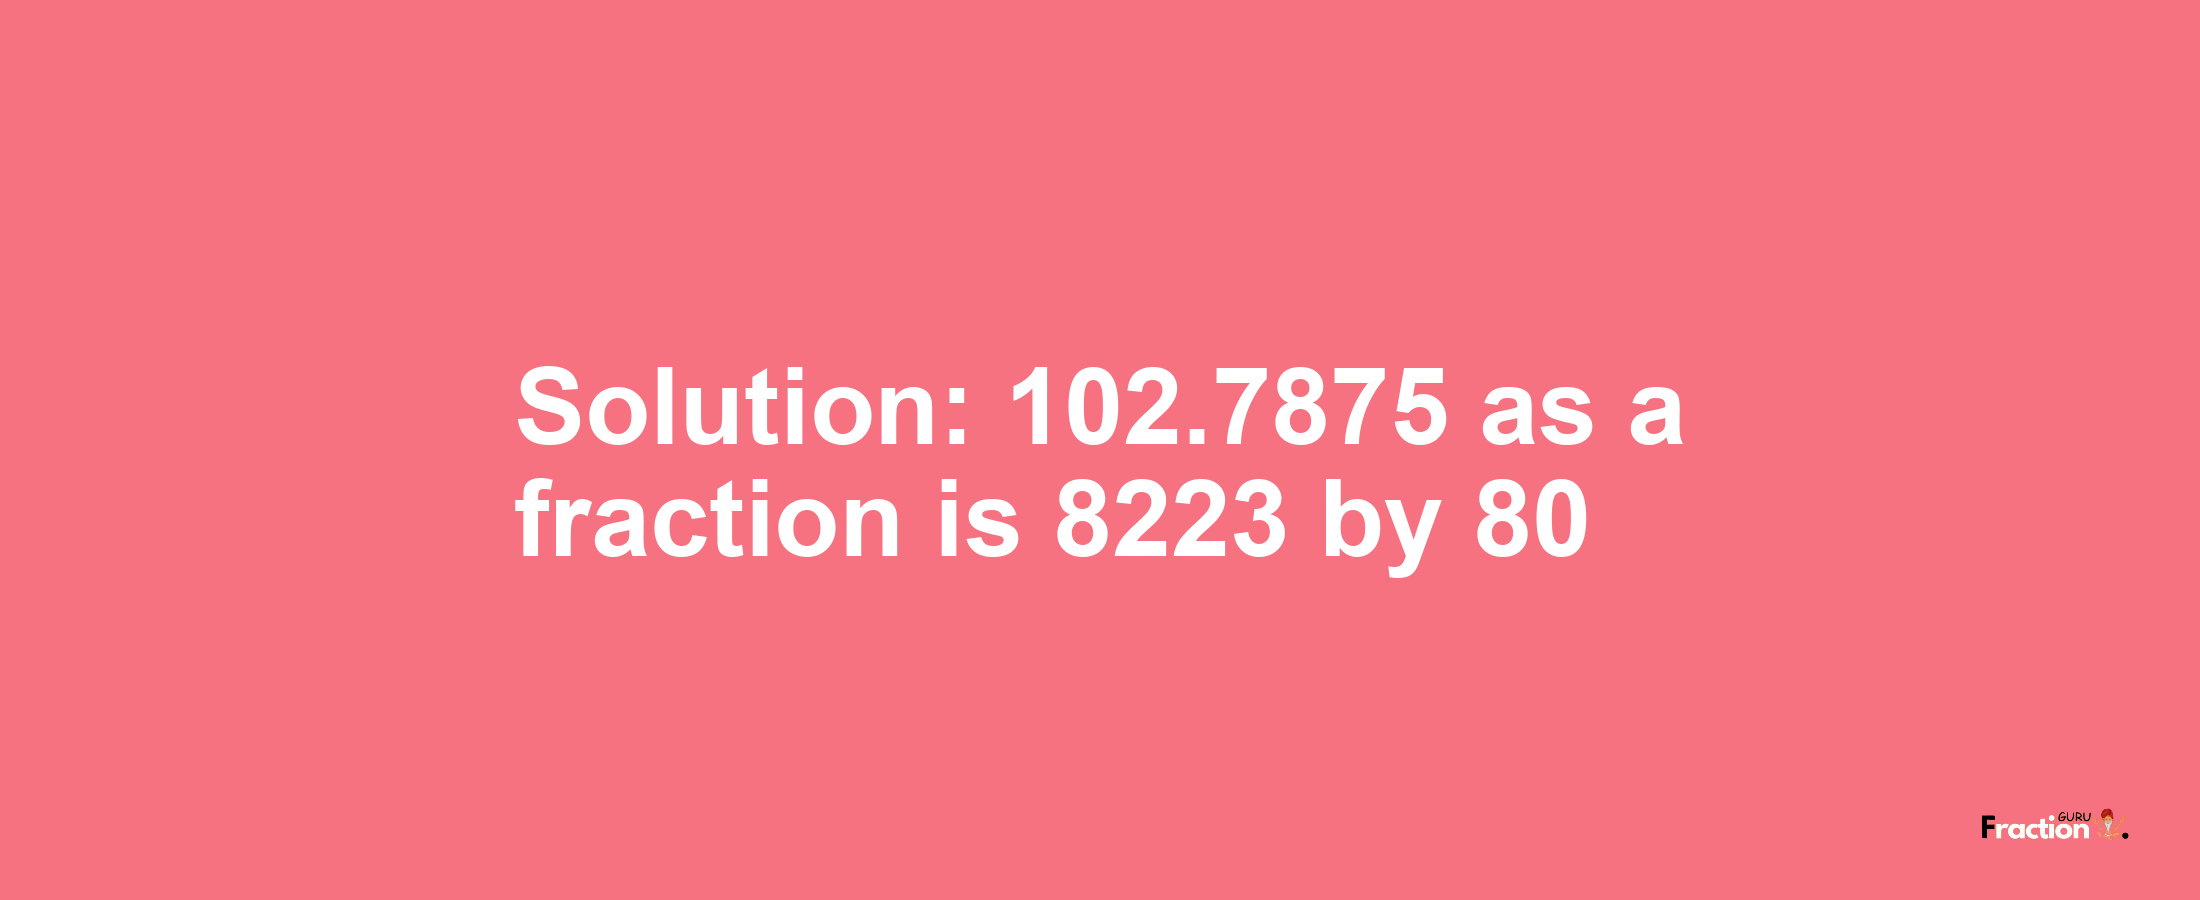 Solution:102.7875 as a fraction is 8223/80